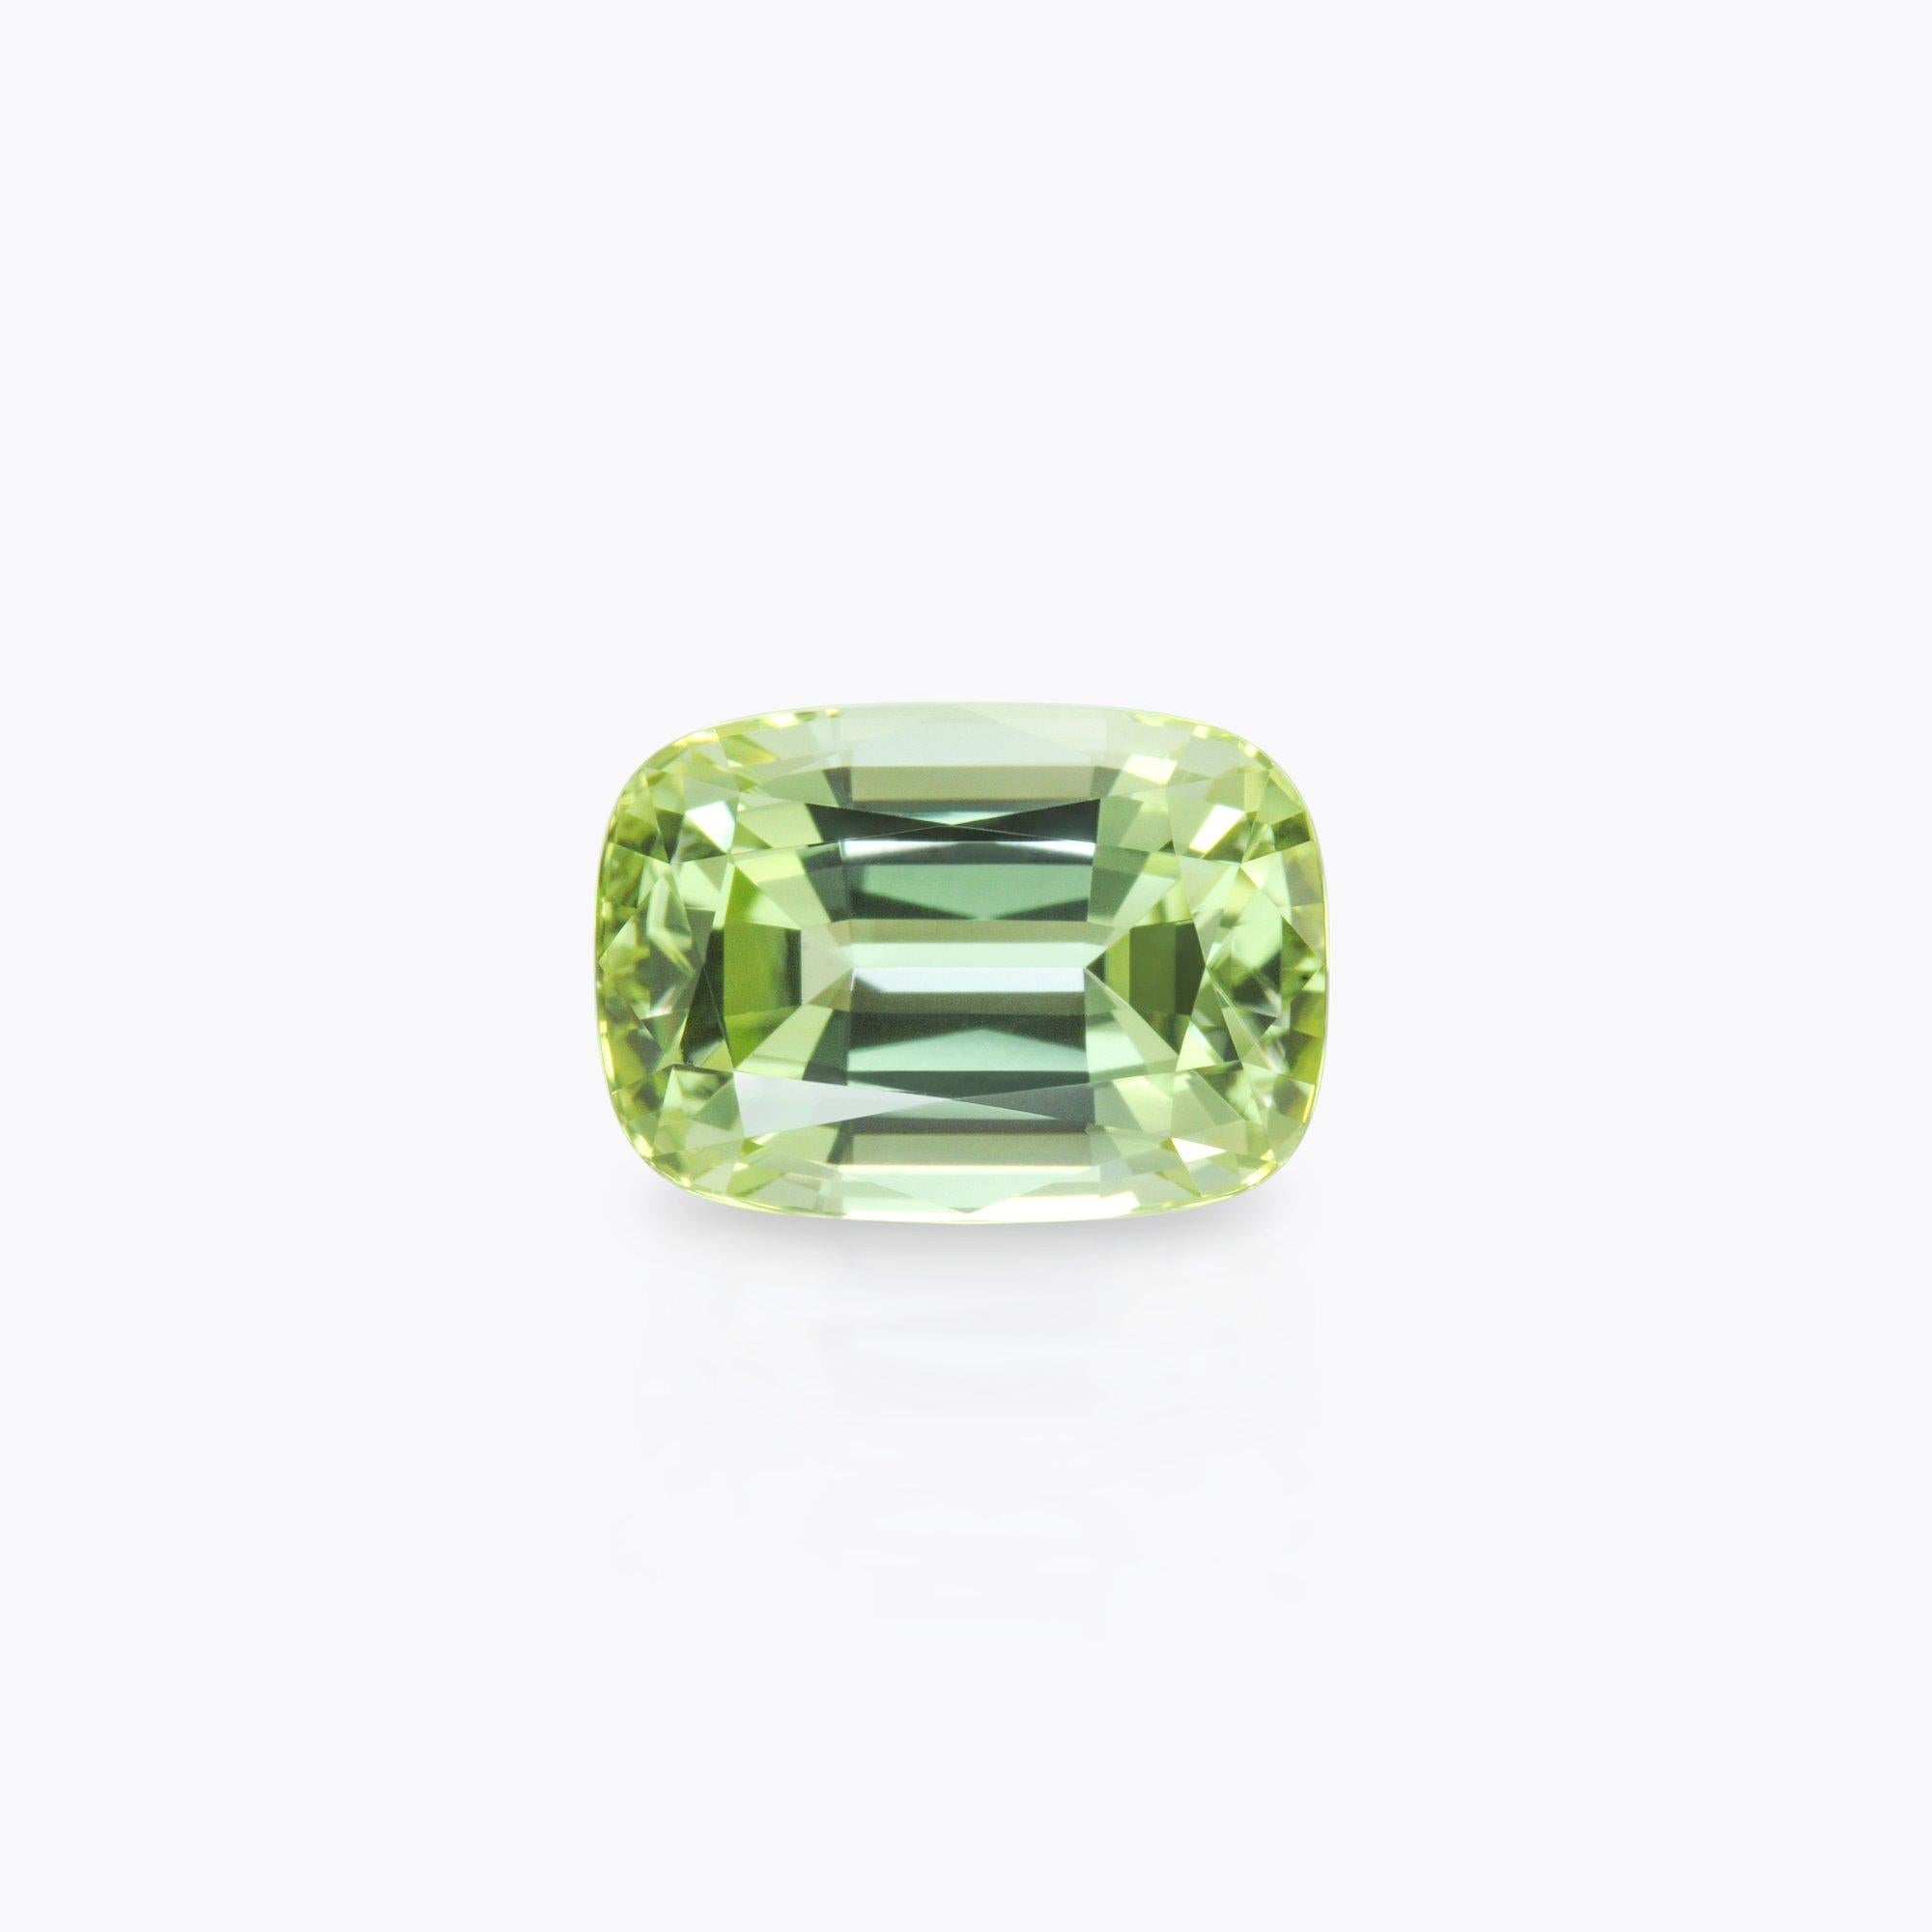 Pristine 5.10 carat Mint Green Tourmaline cushion cut gem offered loose to someone special.
Returns are accepted and paid by us within 7 days of delivery.
We offer supreme custom jewelry work upon request. Please contact us for more details.
(Rings,